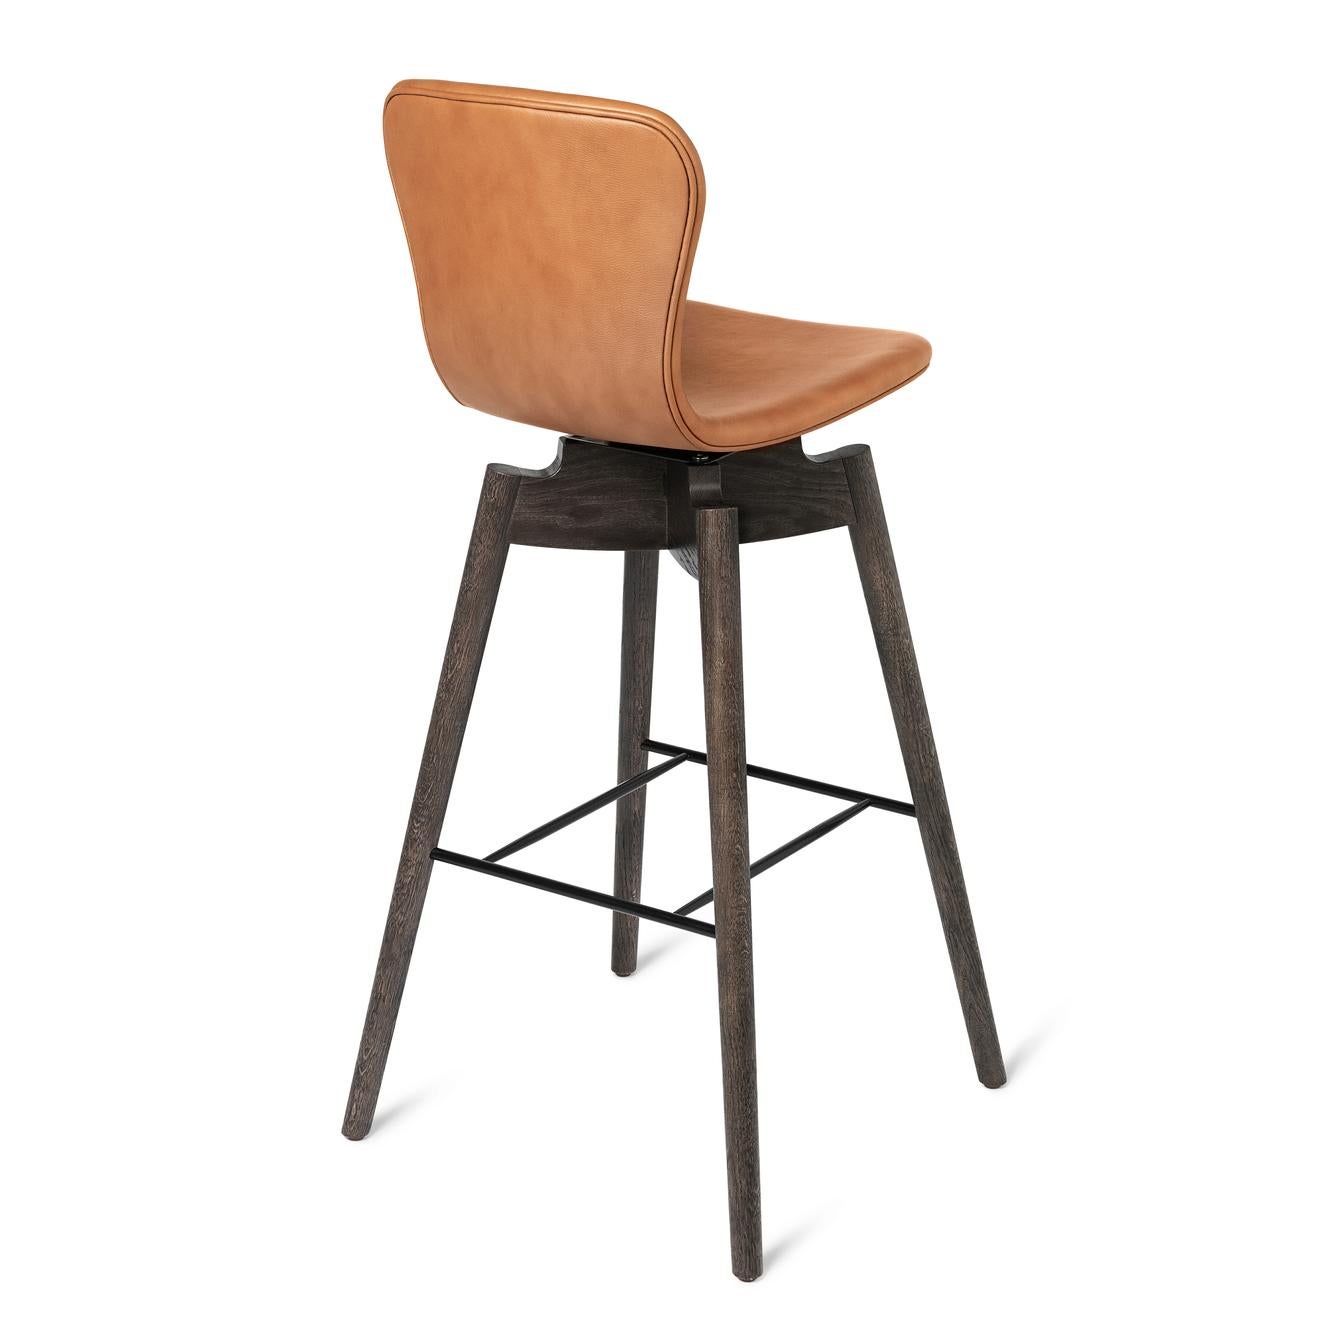 The silhouette of the Shell bar stool is elegant and features long lines in solid oakwood and a soft leather backrest swivel-seat in rich and genuine tones and with clean hand tailored stitches.
Together with the most recognised leather supplier in